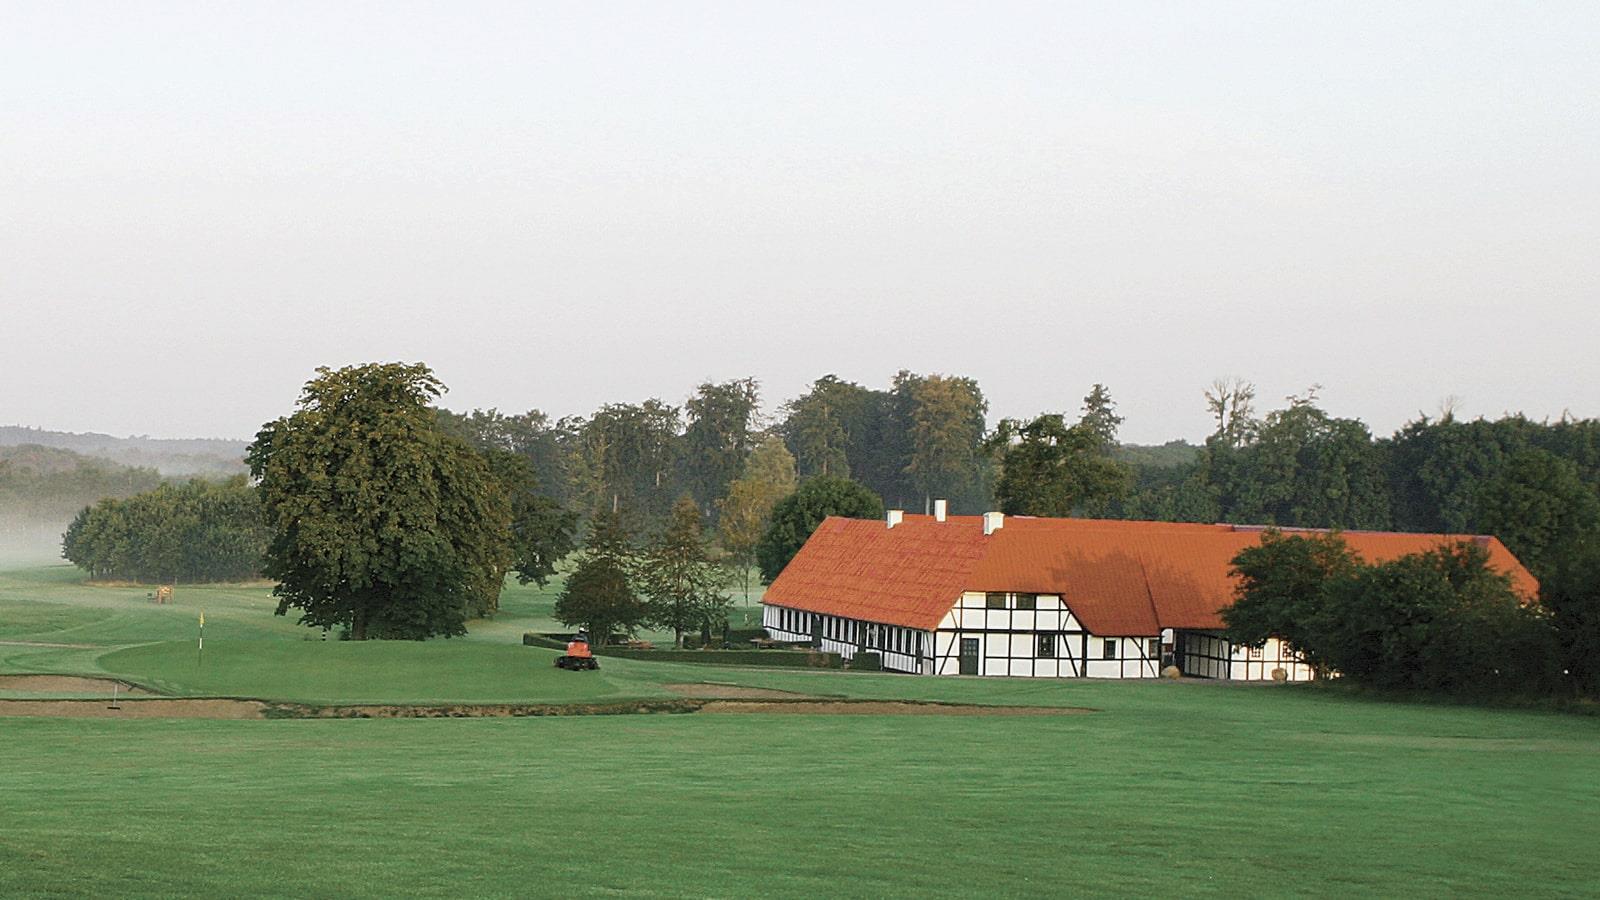 Green fields and half-timbered house of Falster Golf Club